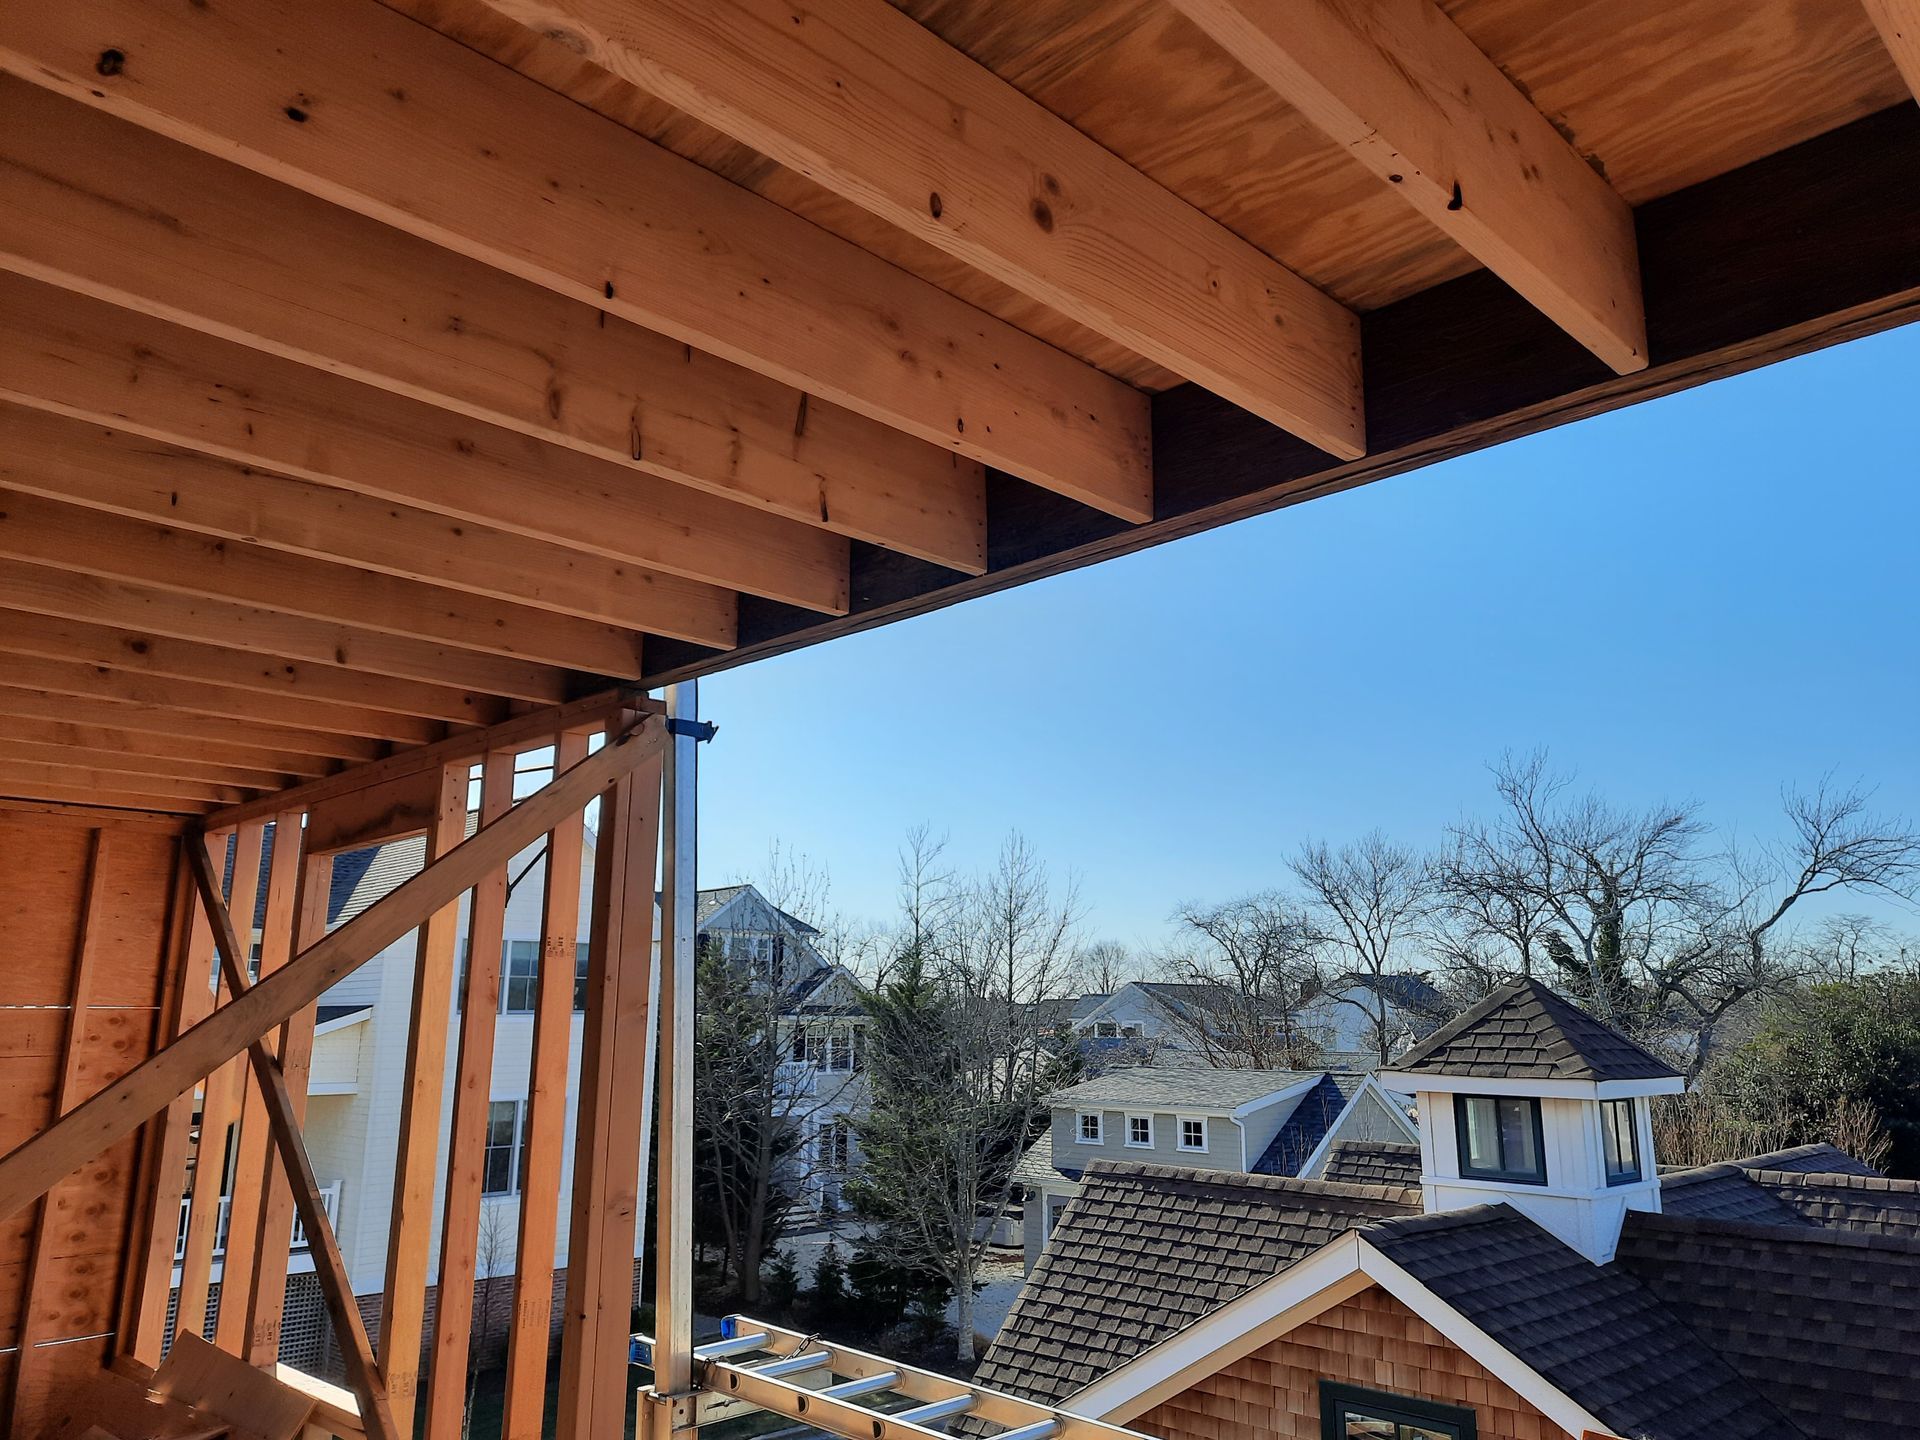 Structural Review and Framing Design